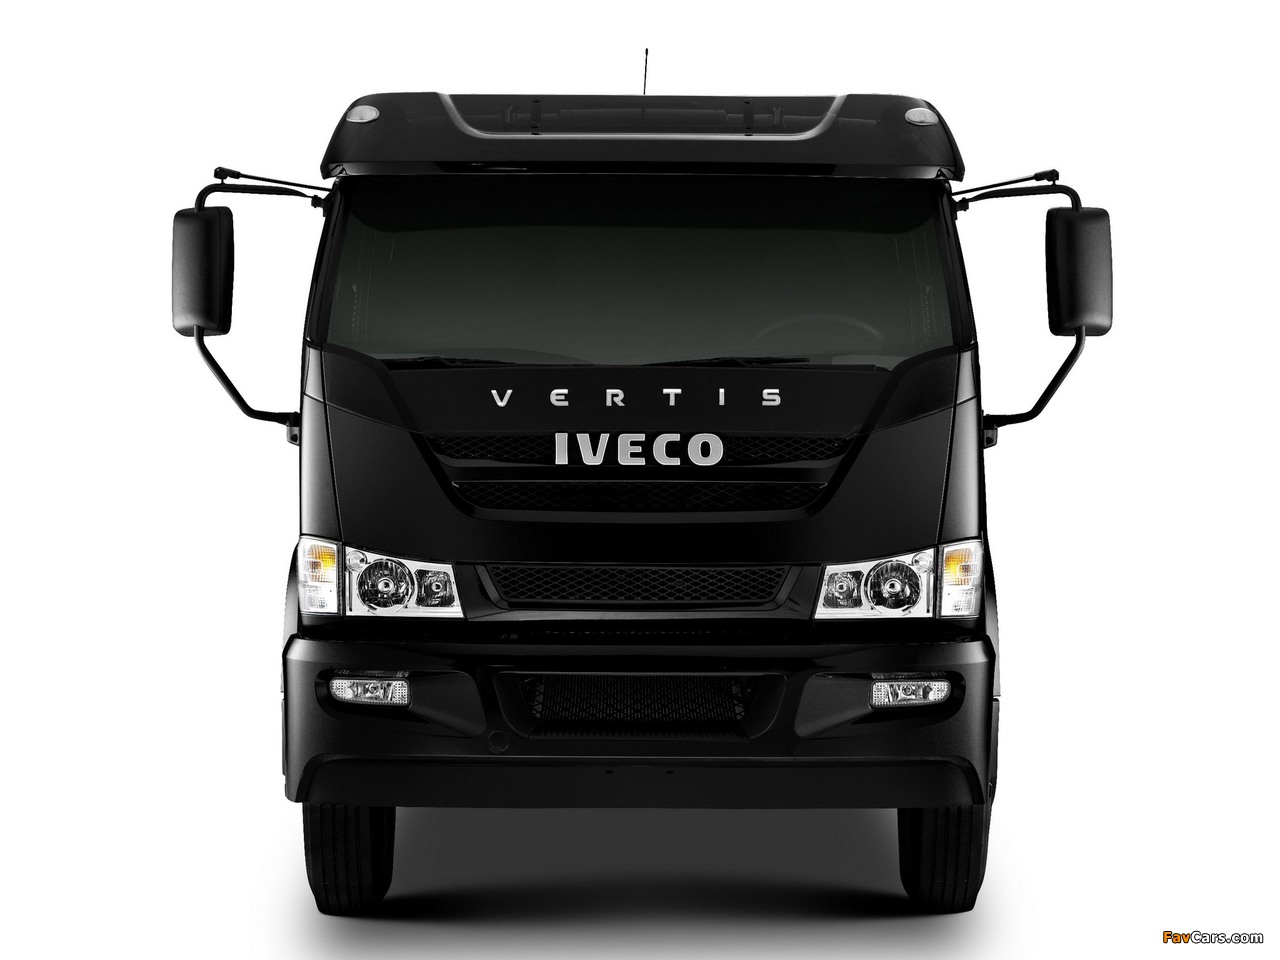 Iveco Vertis 130V 2009 pictures (1280 x 960)